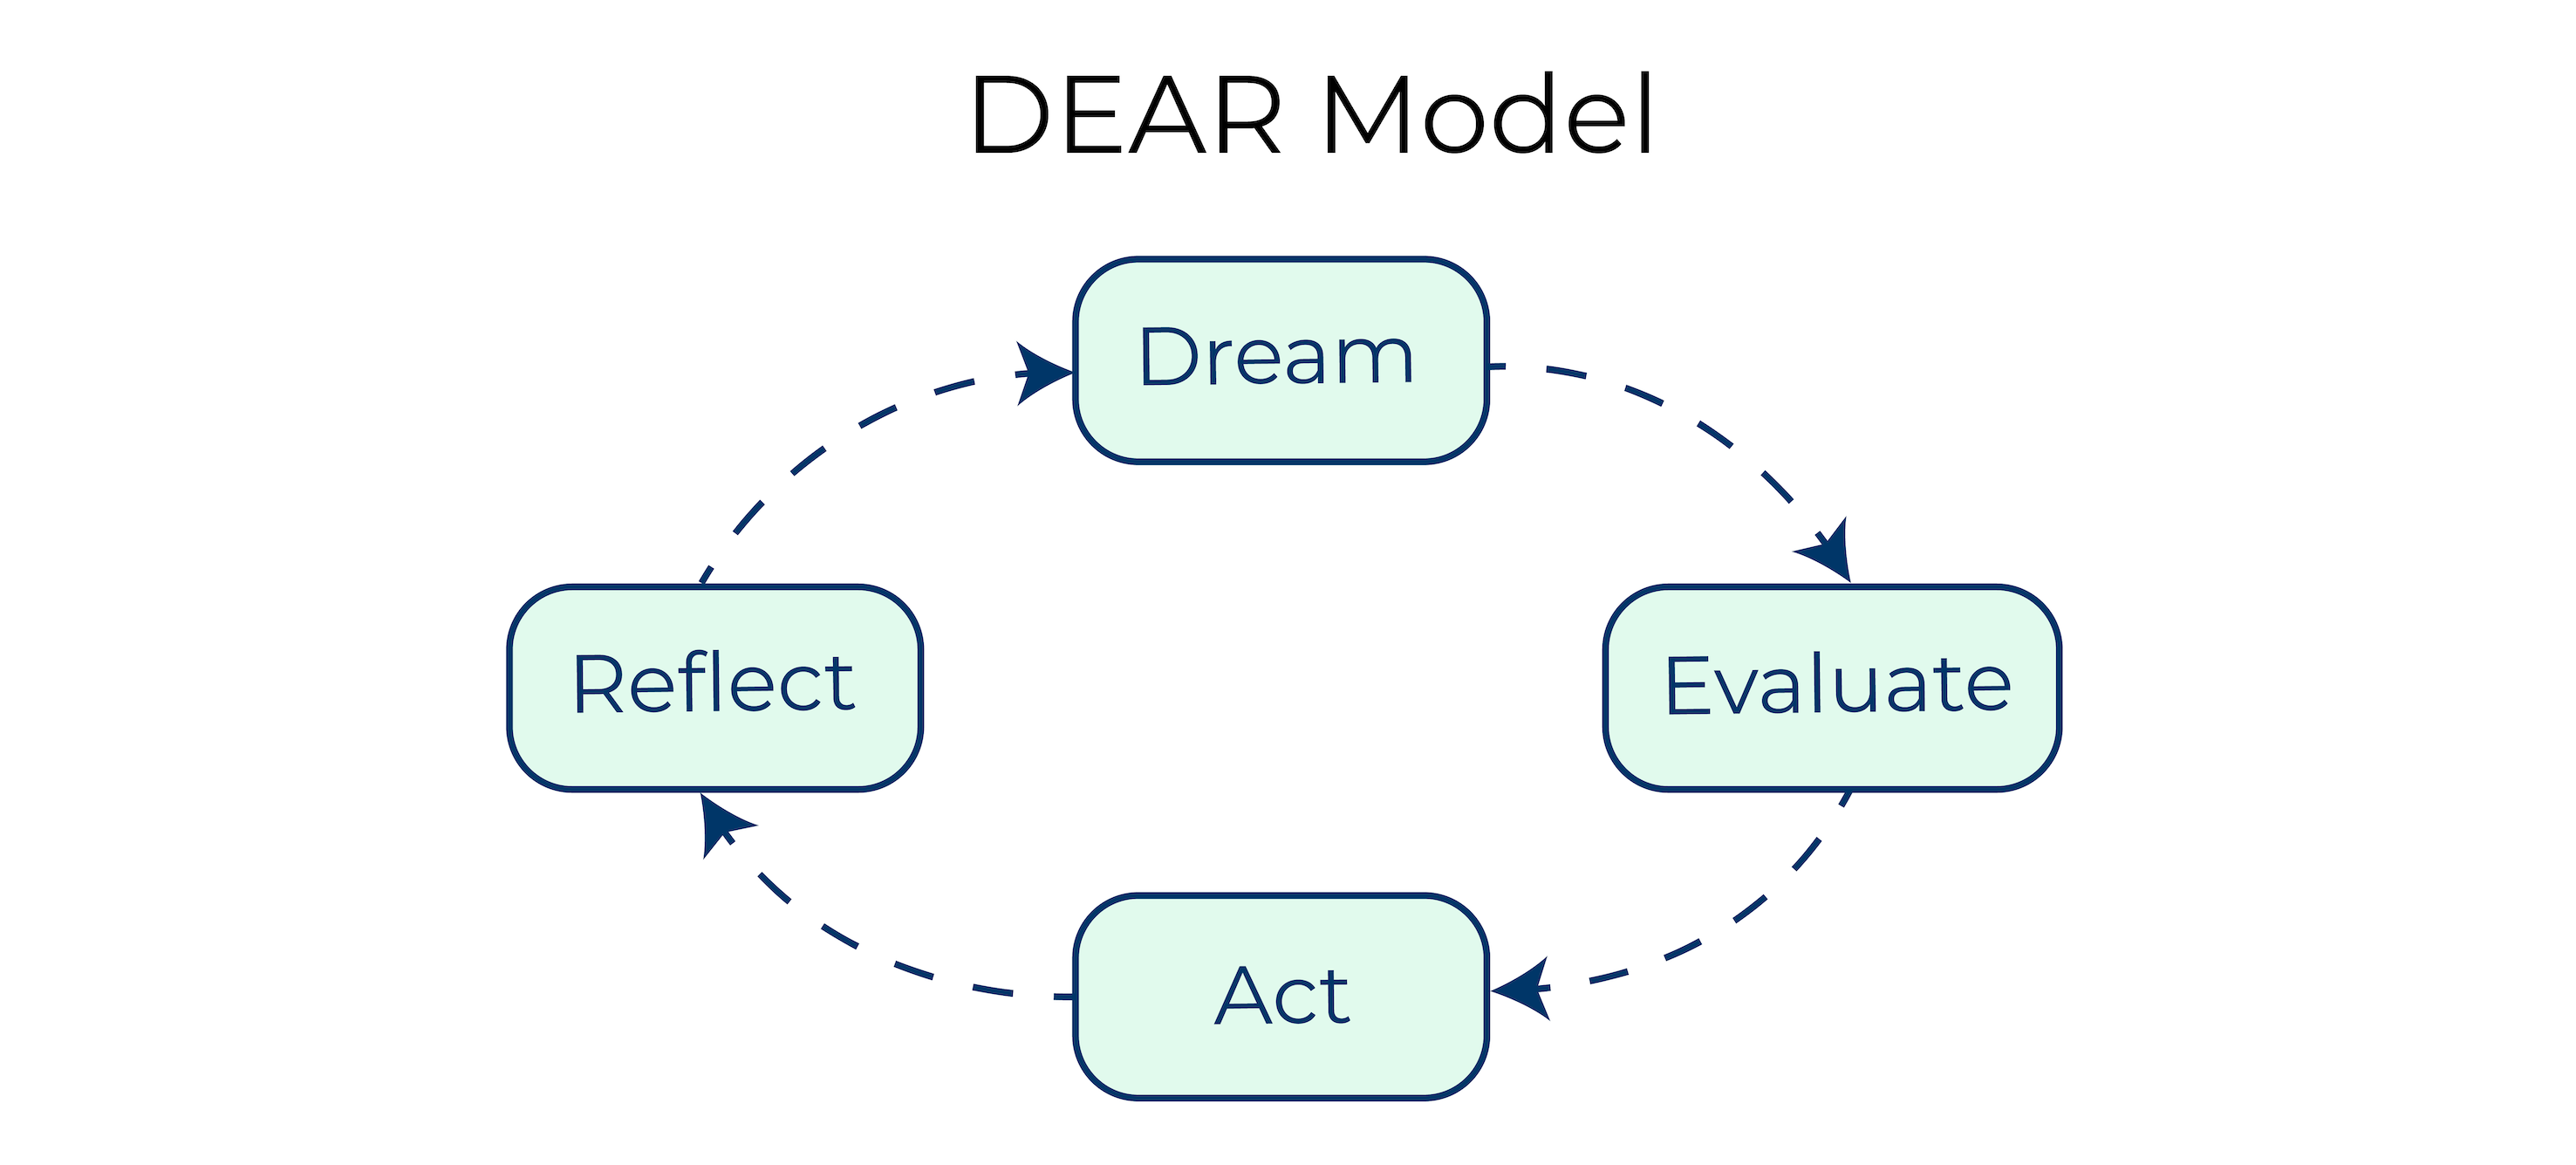 The DEAR Model is a cycle of 4 steps: Dream, Evaluate, Act, Reflect.